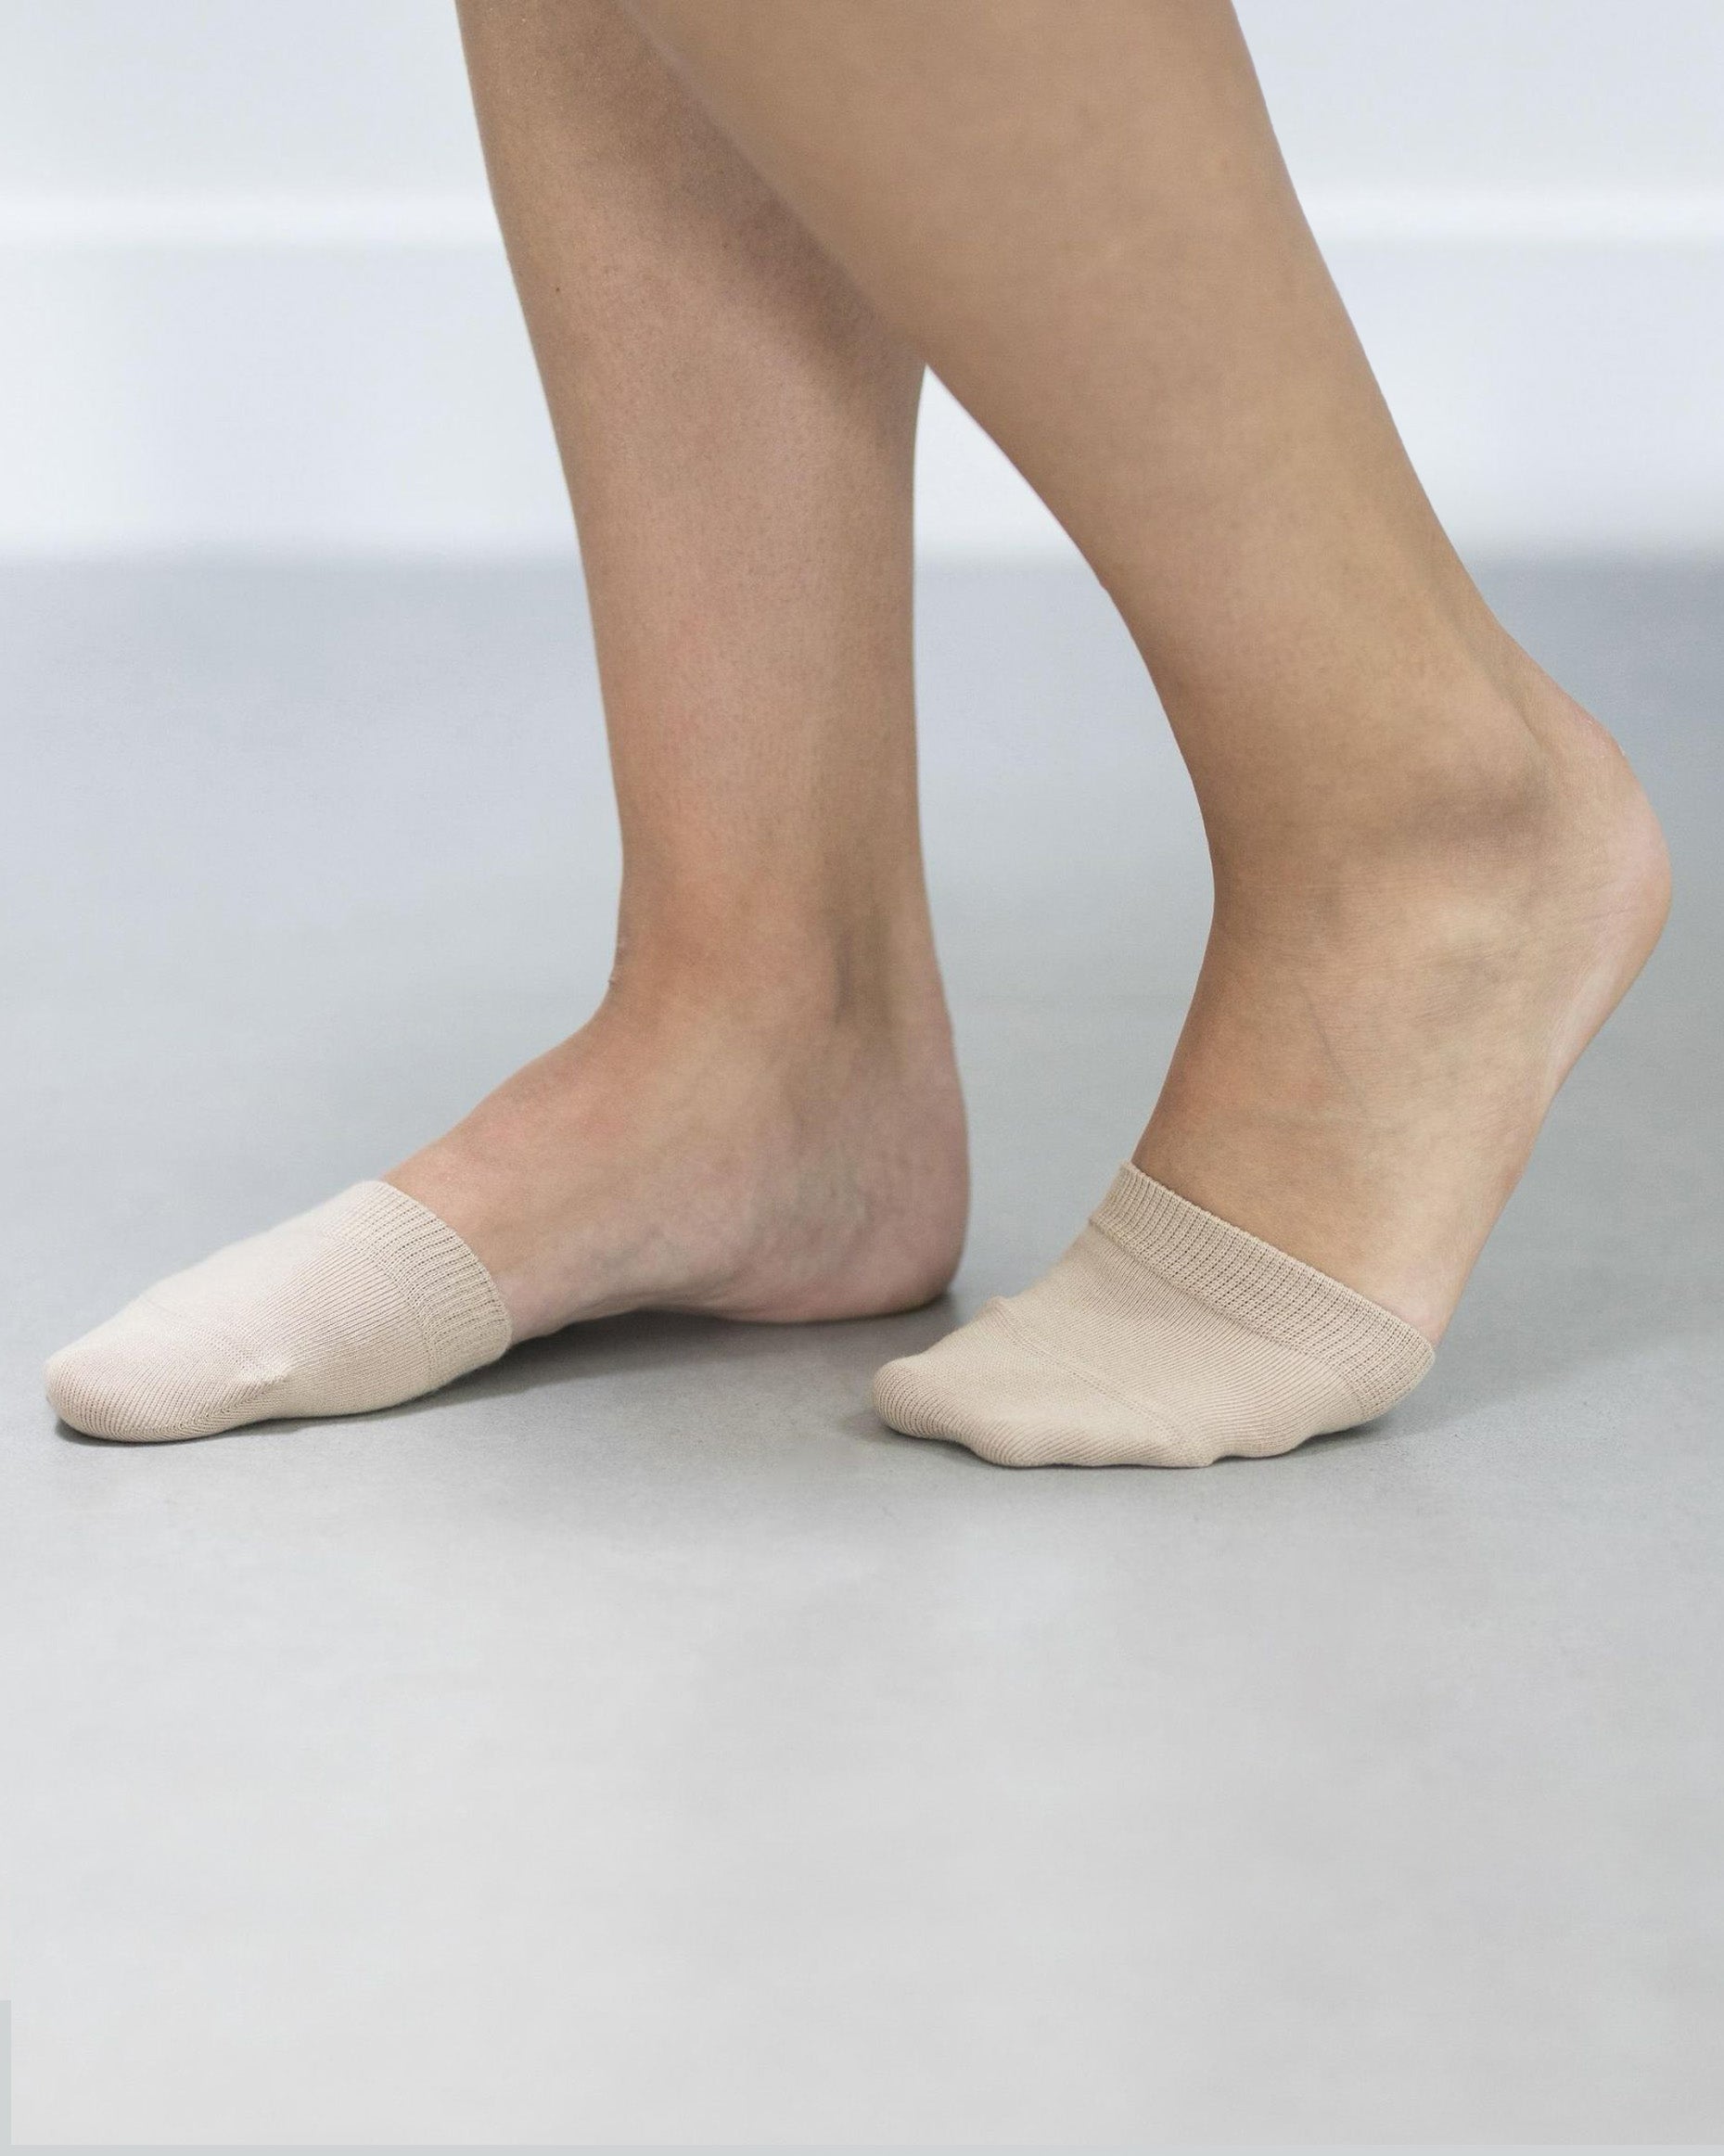 Bonnie Doon Toe Cover BE311000 - Nude beige cotton toe sock perfect for wearing with mules or sling back shoes